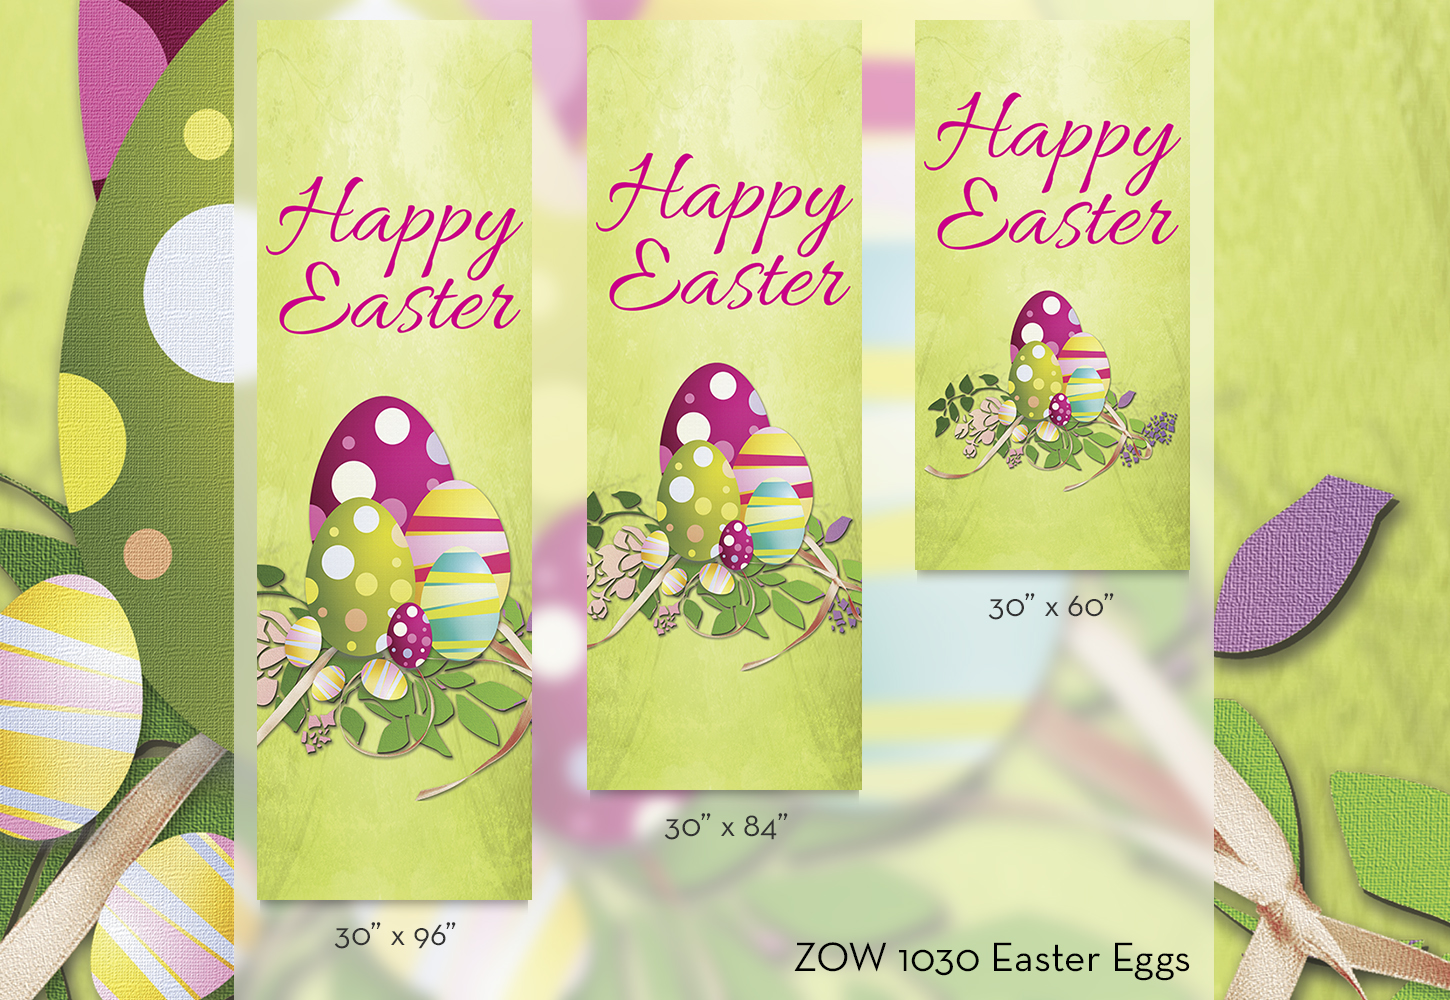 ZOW 1030 Easter Eggs